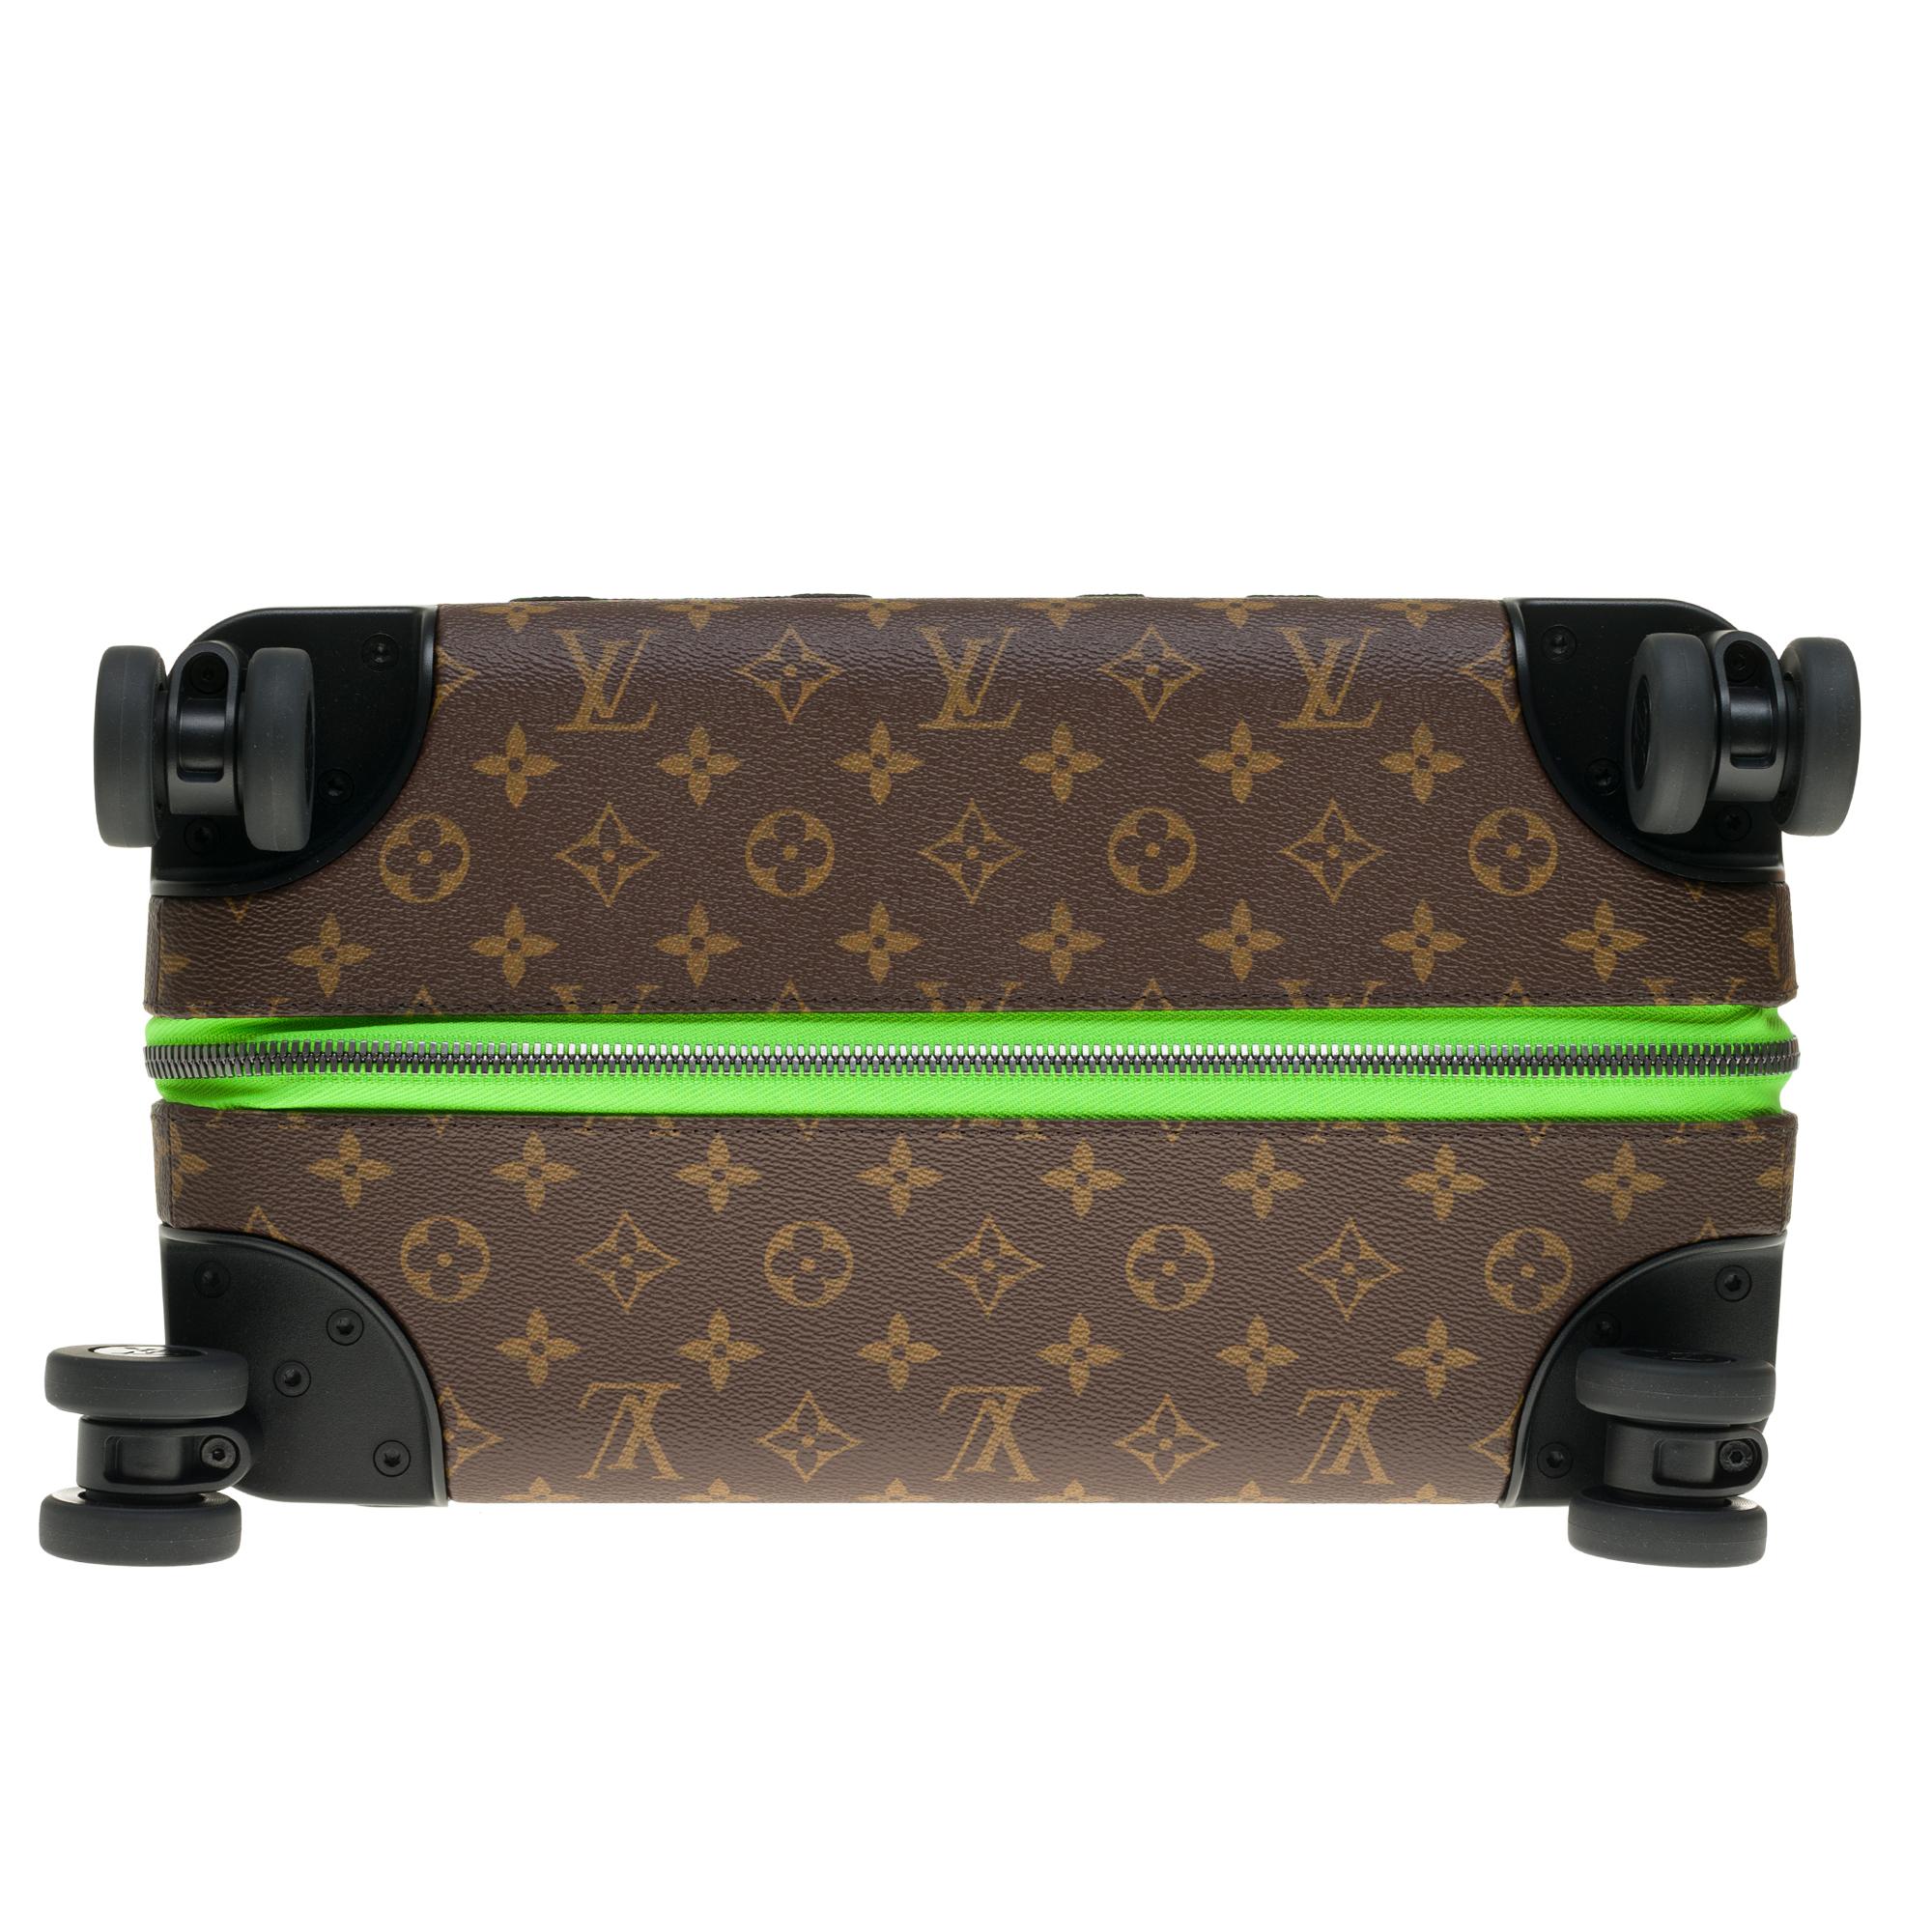 NEW/LIMITED EDITION/Louis Vuitton Horizon 55 Suitcase in brown monogram canvas 3